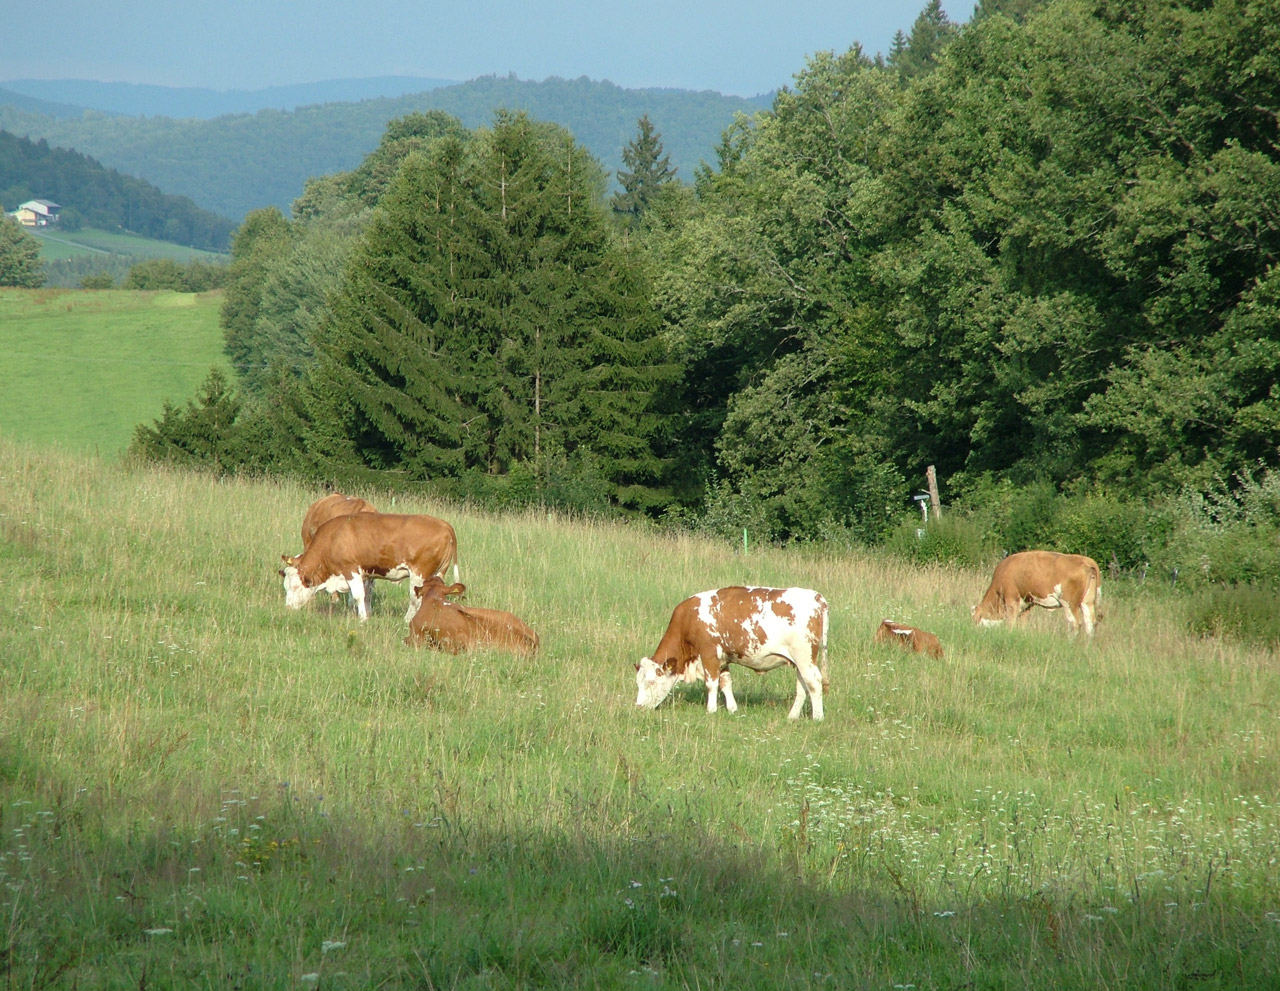 Cattle on pasture